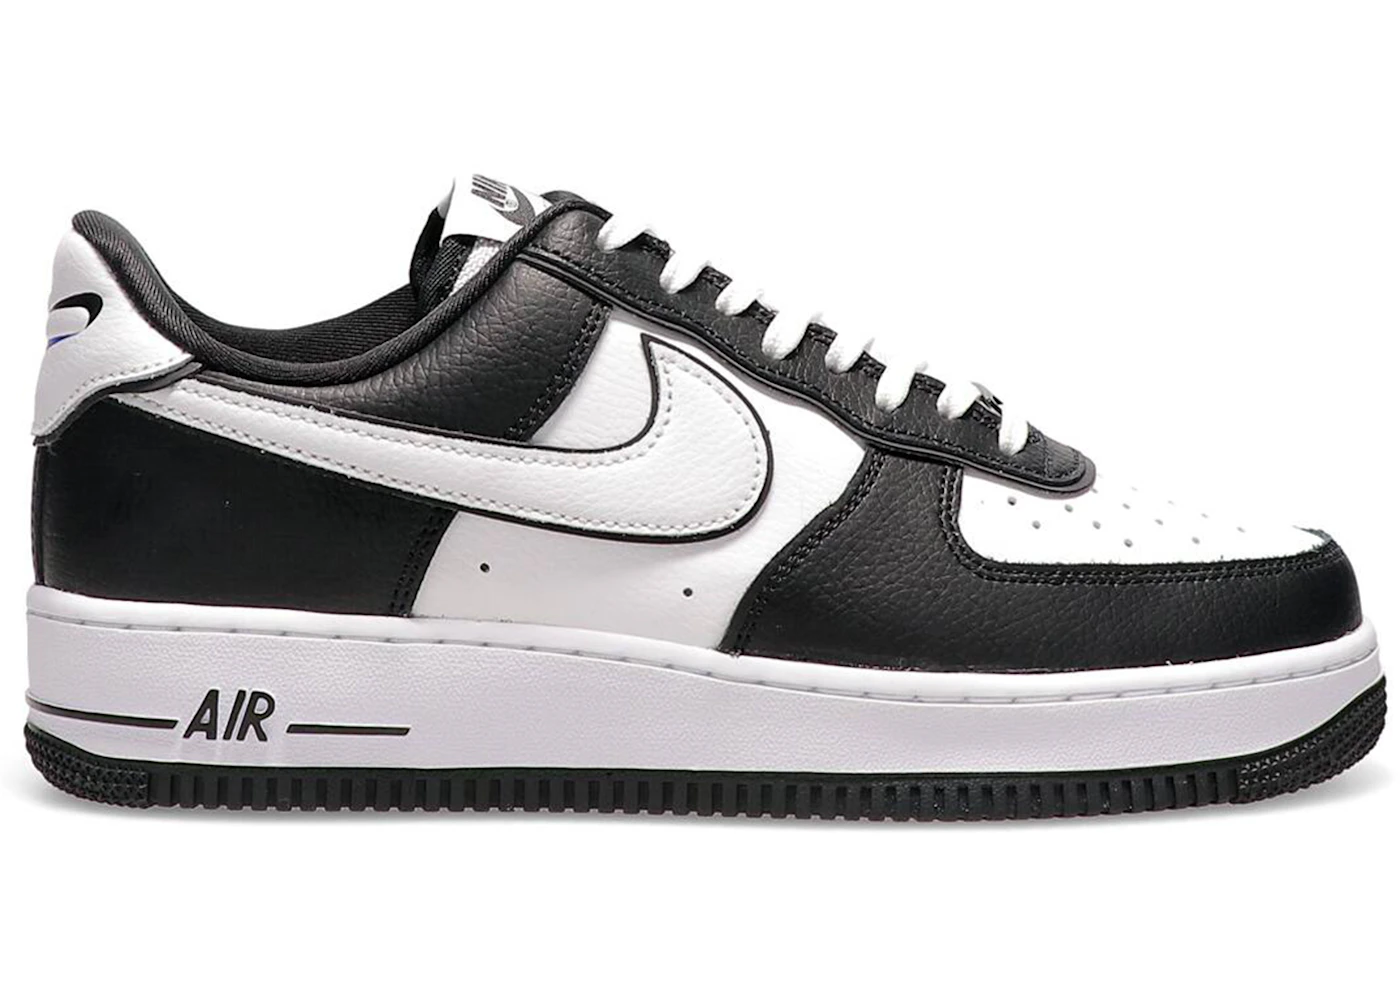 airforce 1s lv8